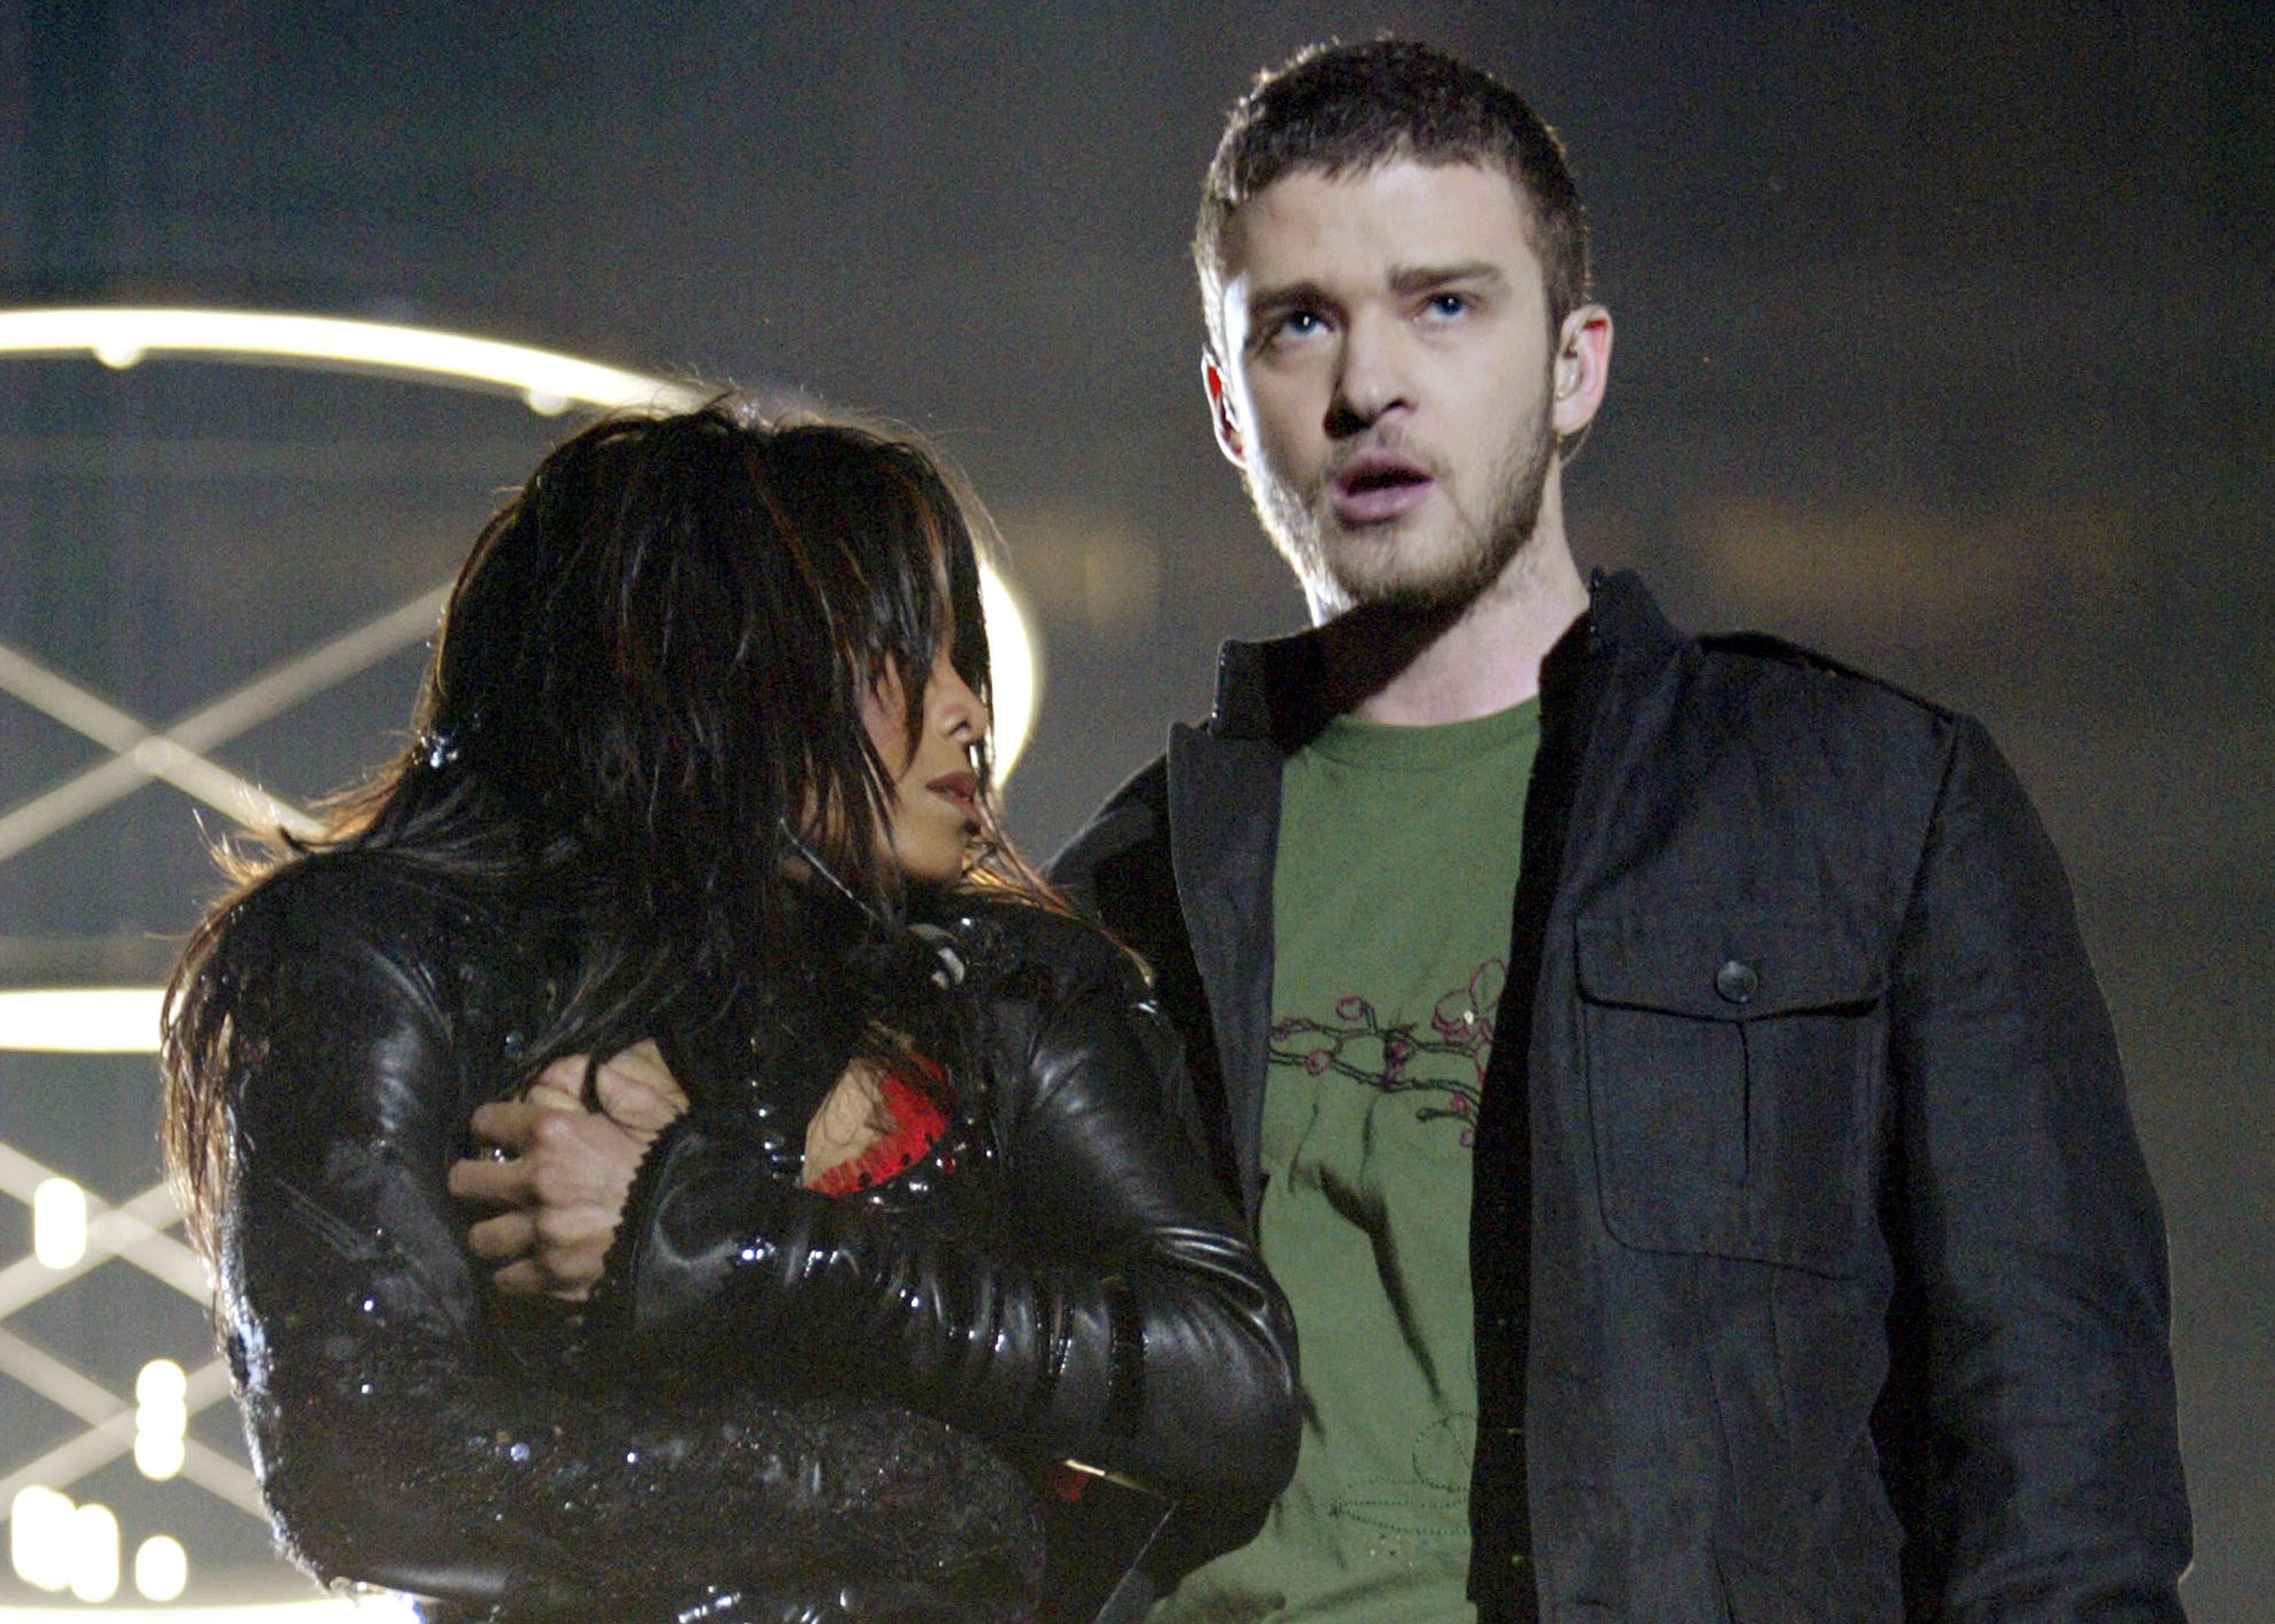 Janet Jackson angrily looks up at a dumbfounded Justin Timberlake